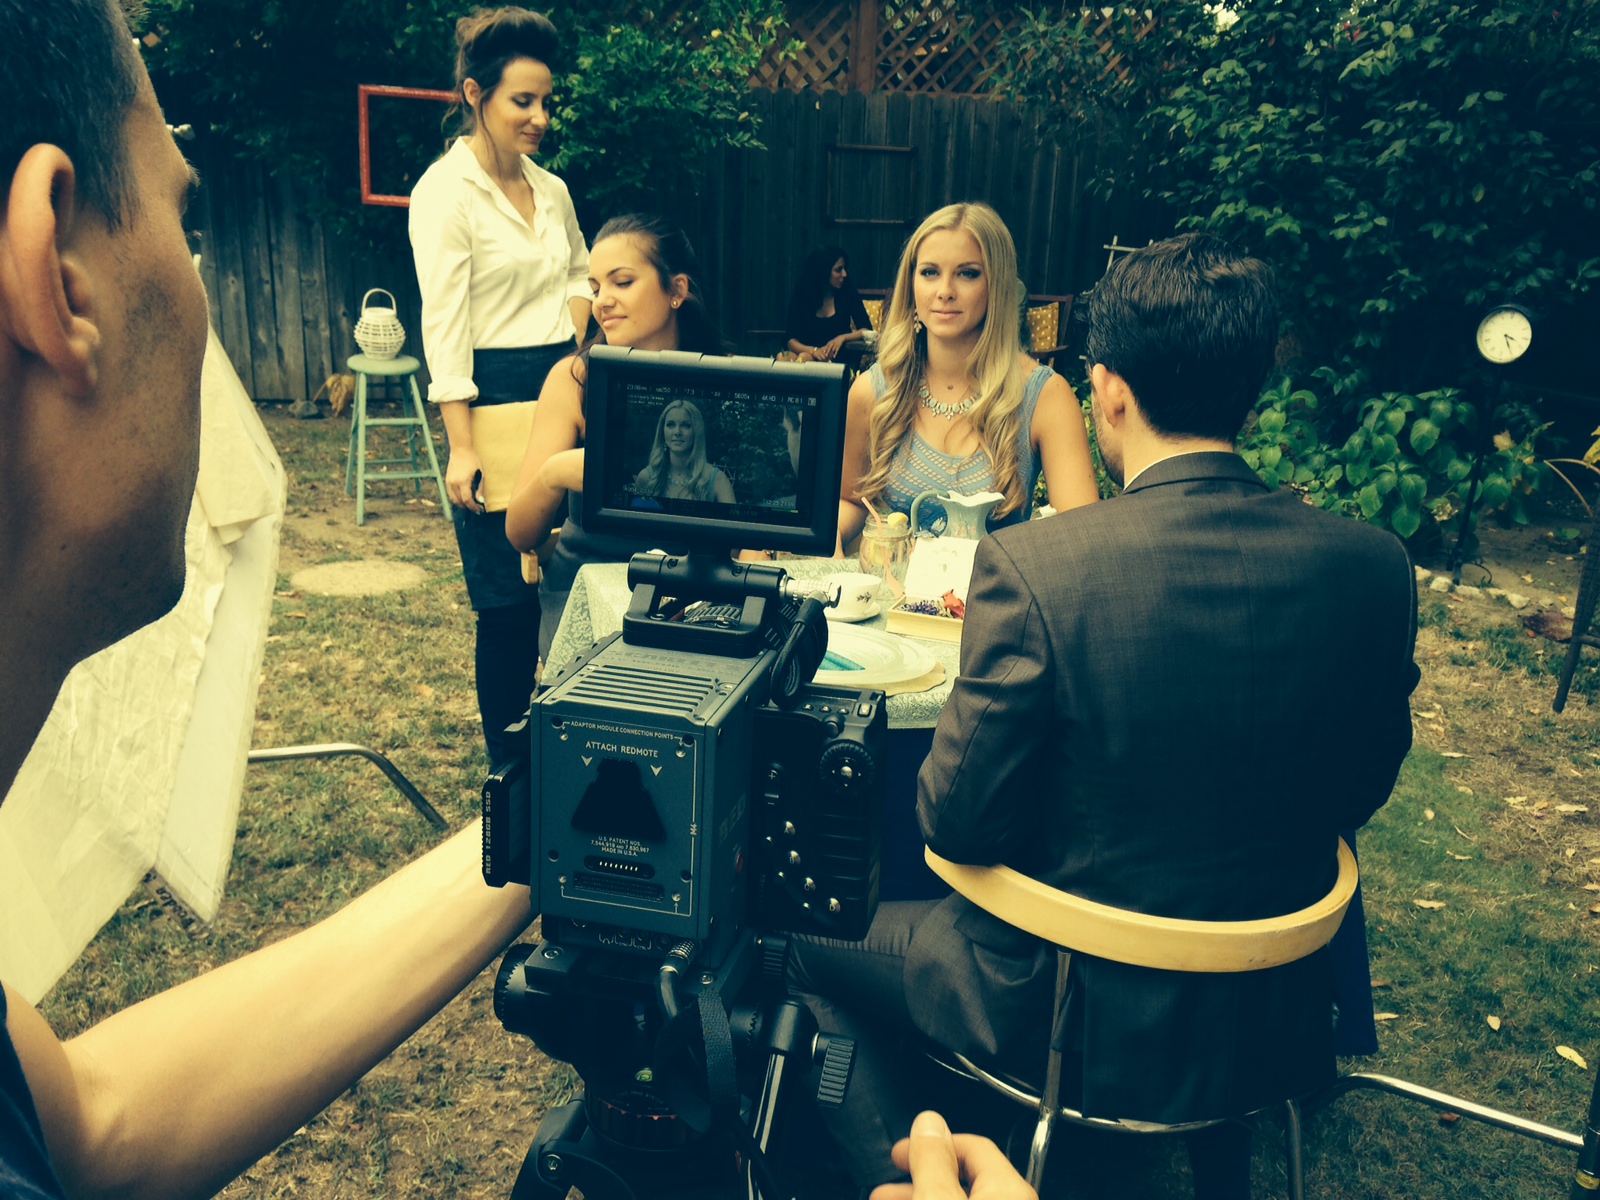 On the set of Unrelated(2014) with Gabriela Lopez(III), Travis Quentin Young, Candace Groff, and Marko Slavnic